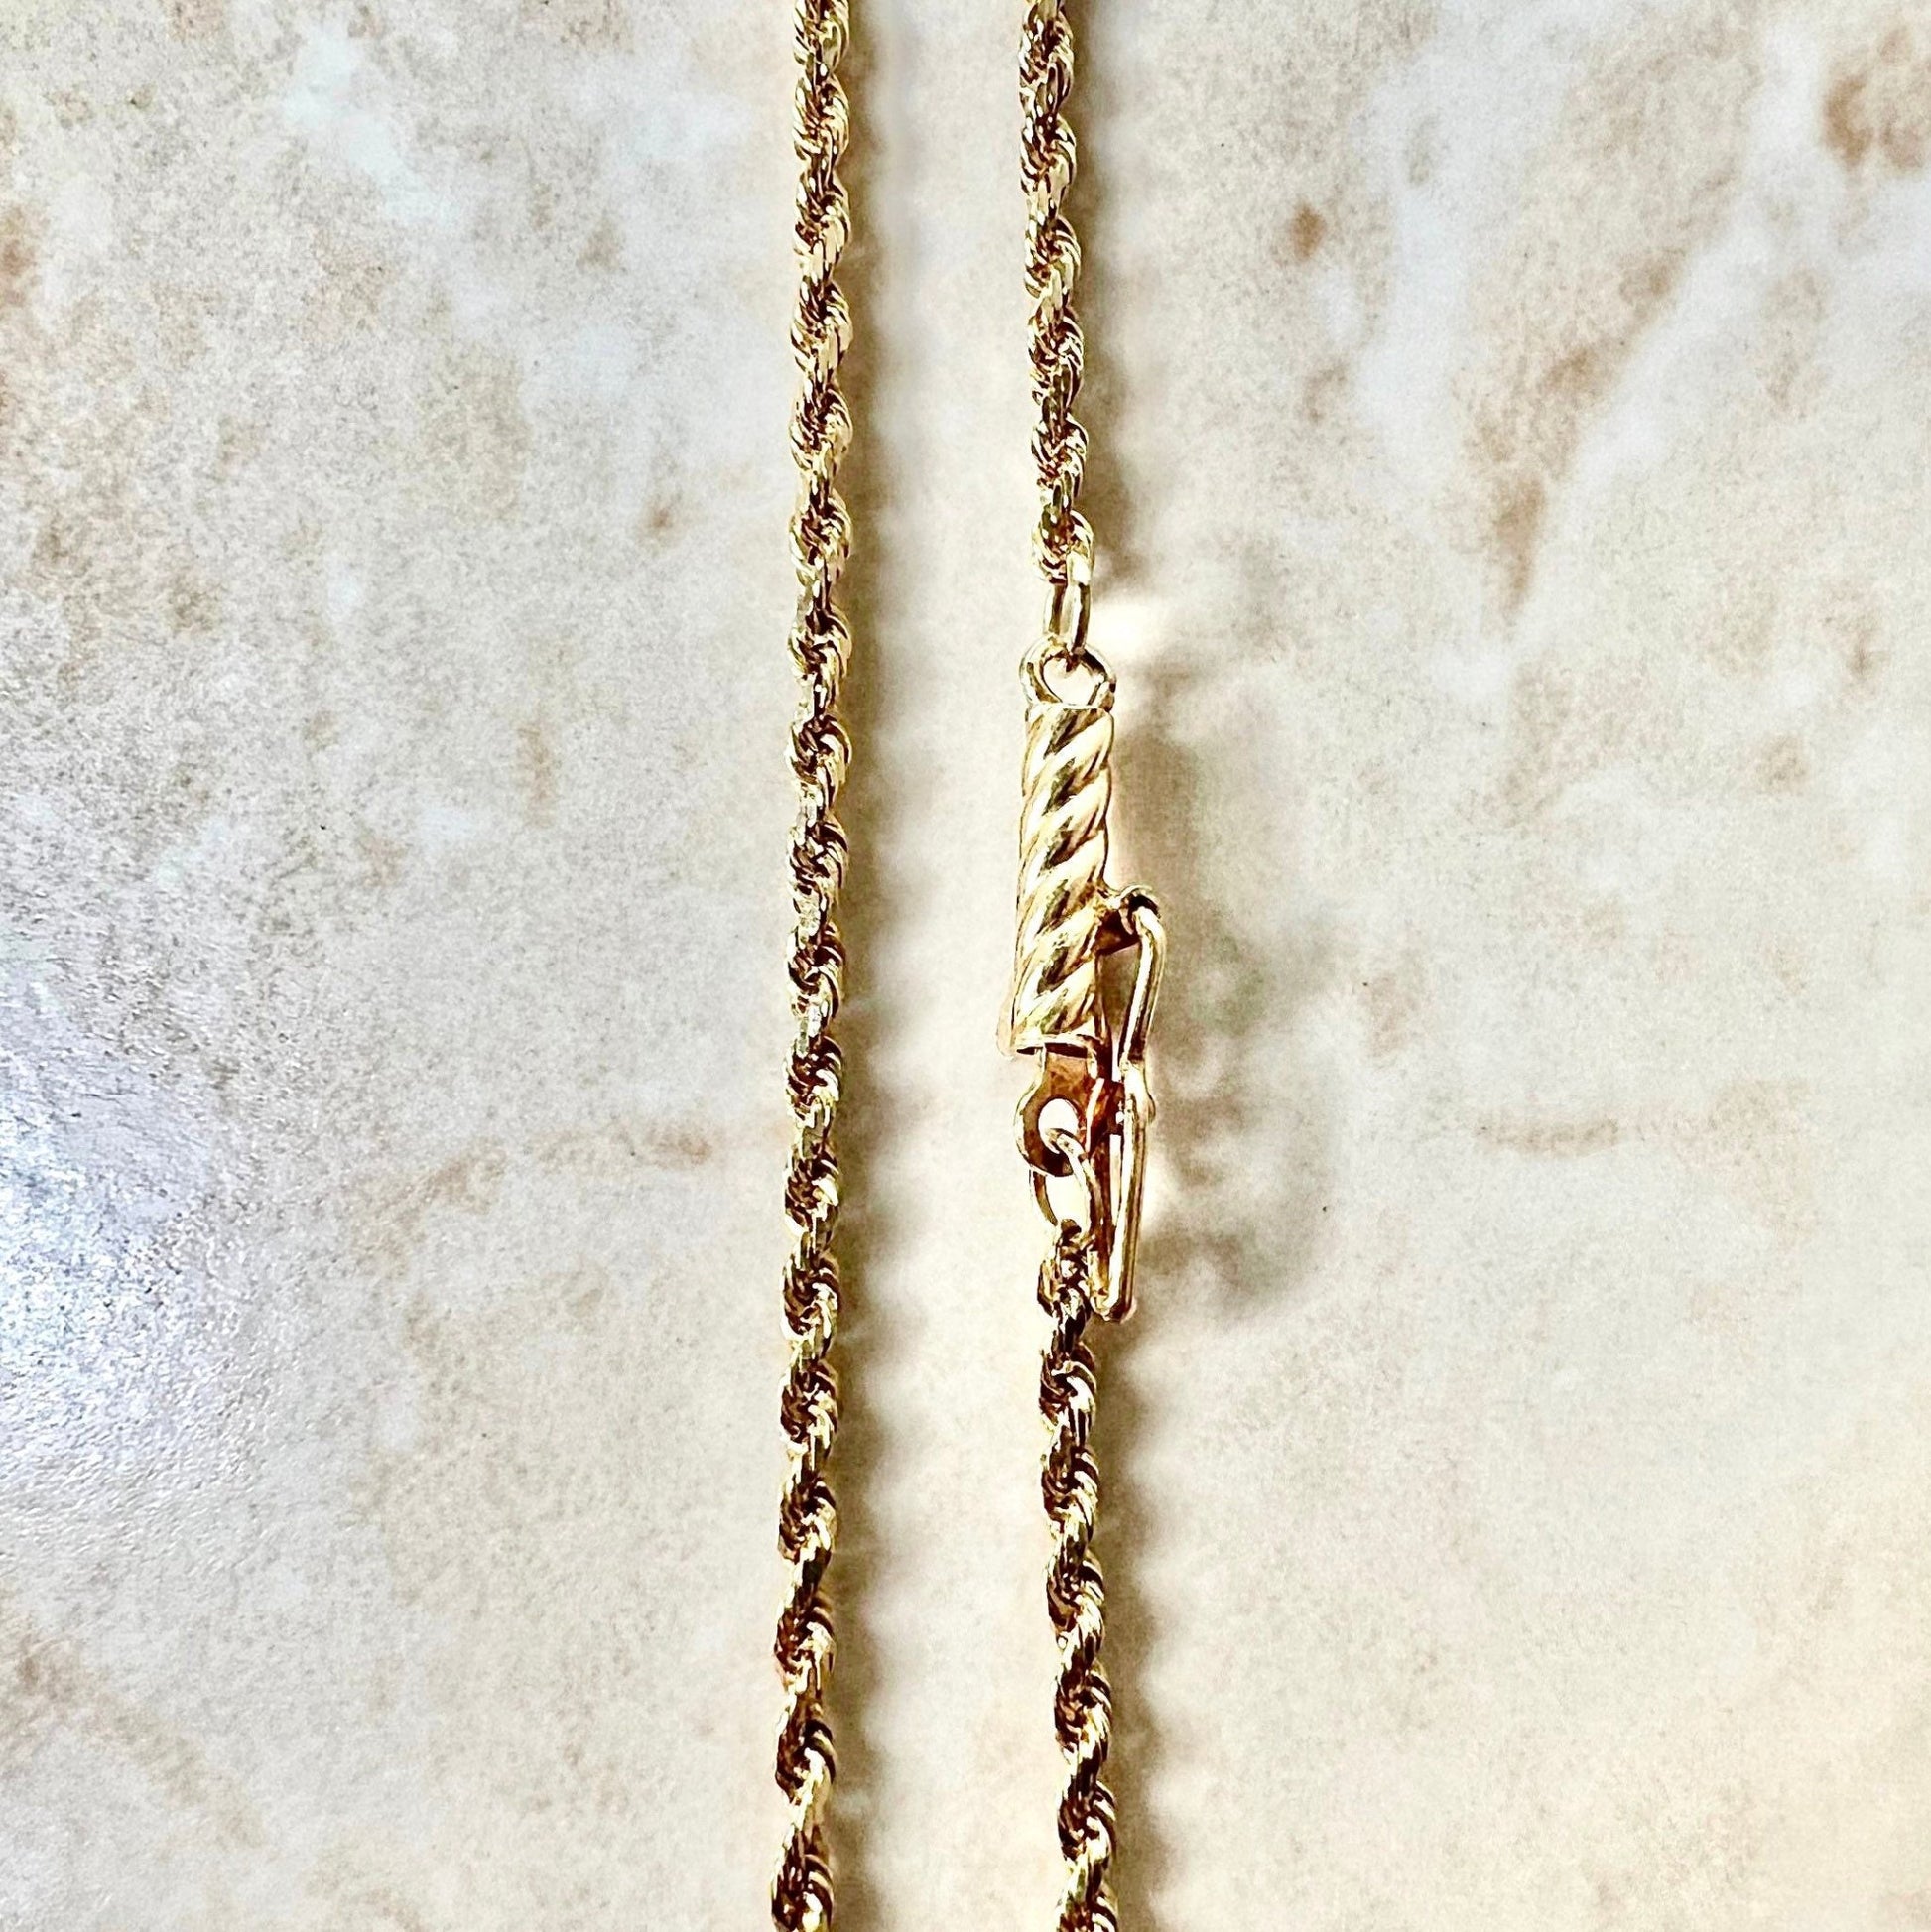 Vintage 1960s 14K Yellow Gold Rope Chain Necklace With Safety Clasp - 18” Gold Chain - Yellow Gold Chain Necklace - Best Gifts For Her